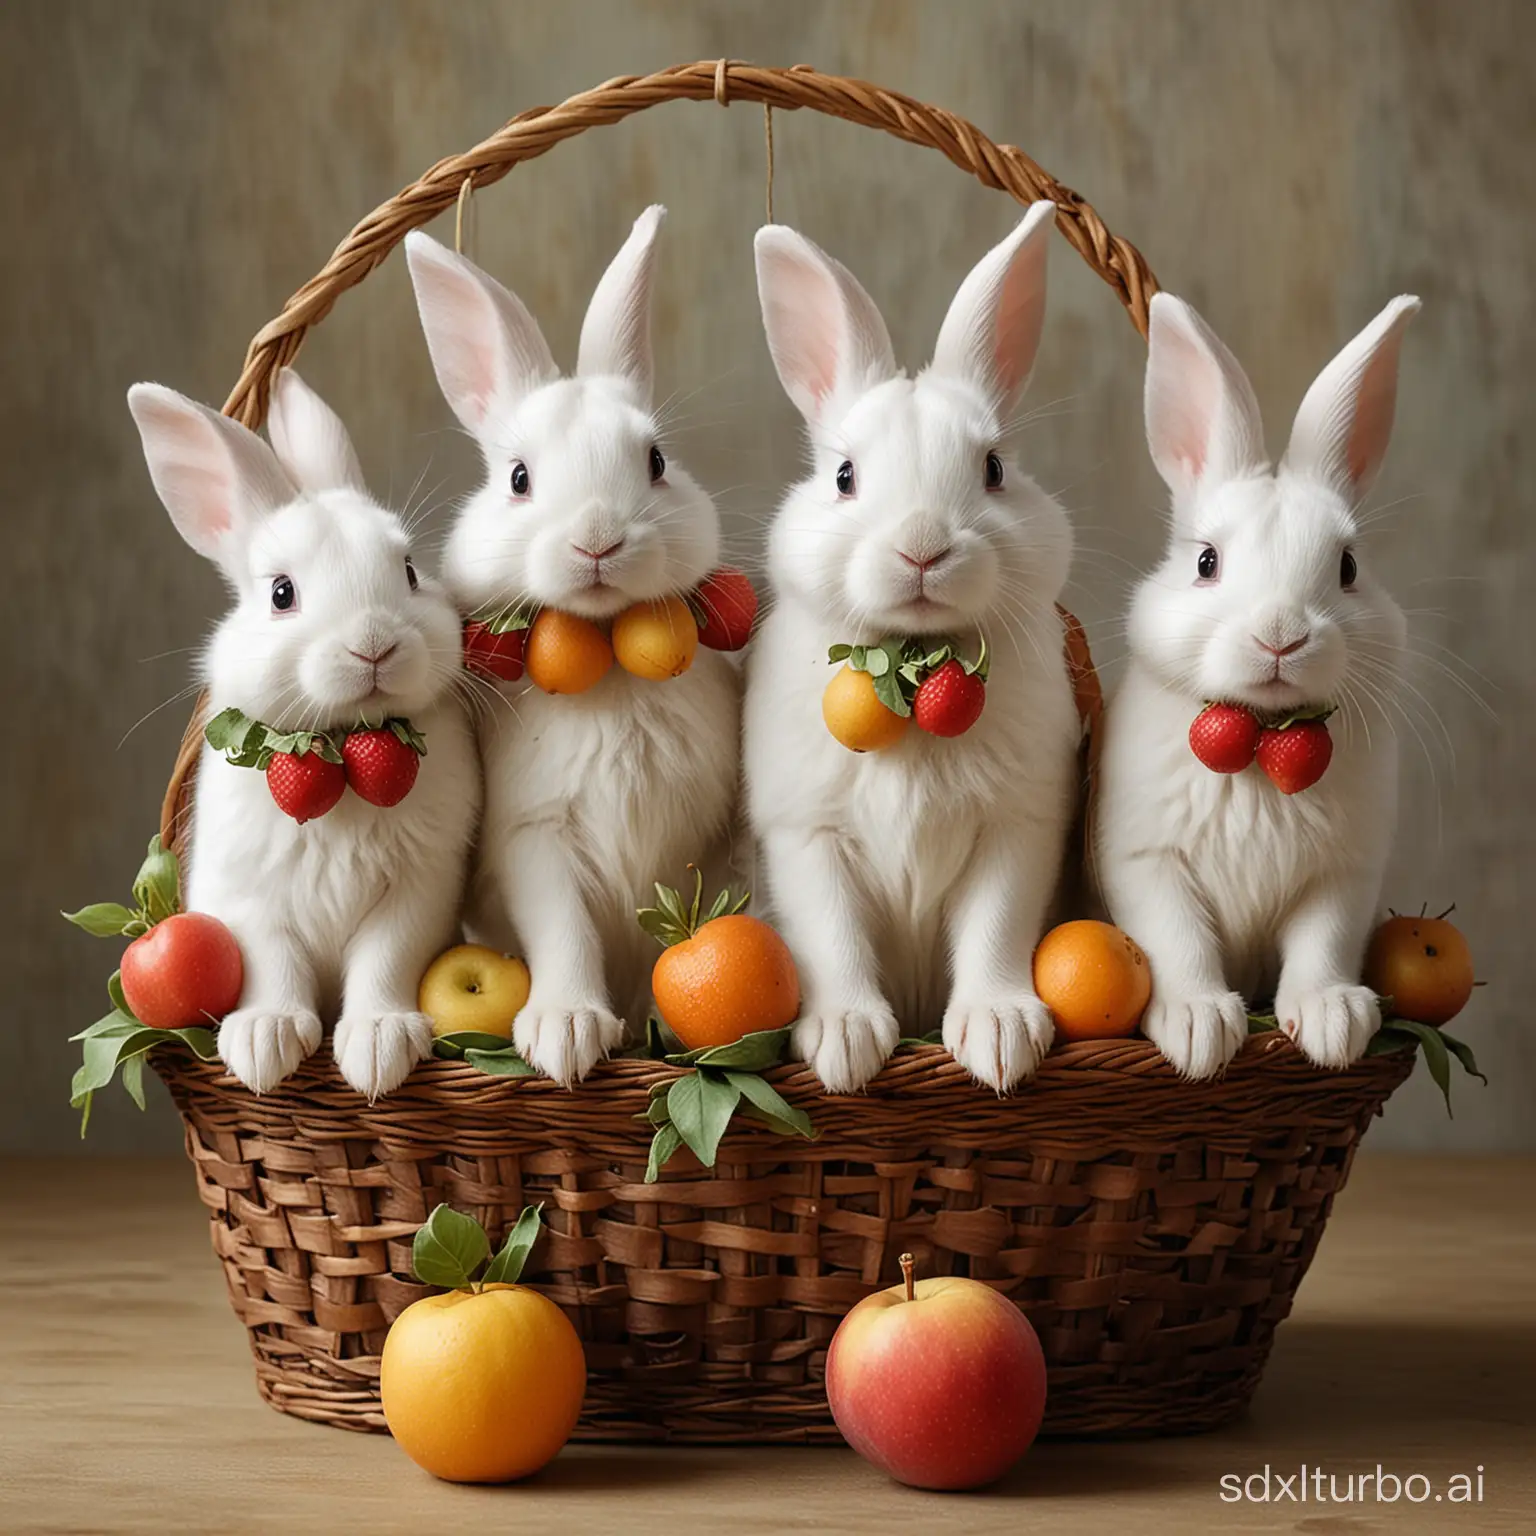 Three little white rabbits sit on the back of a spotted dog with a fruit basket hanging from their mouths.